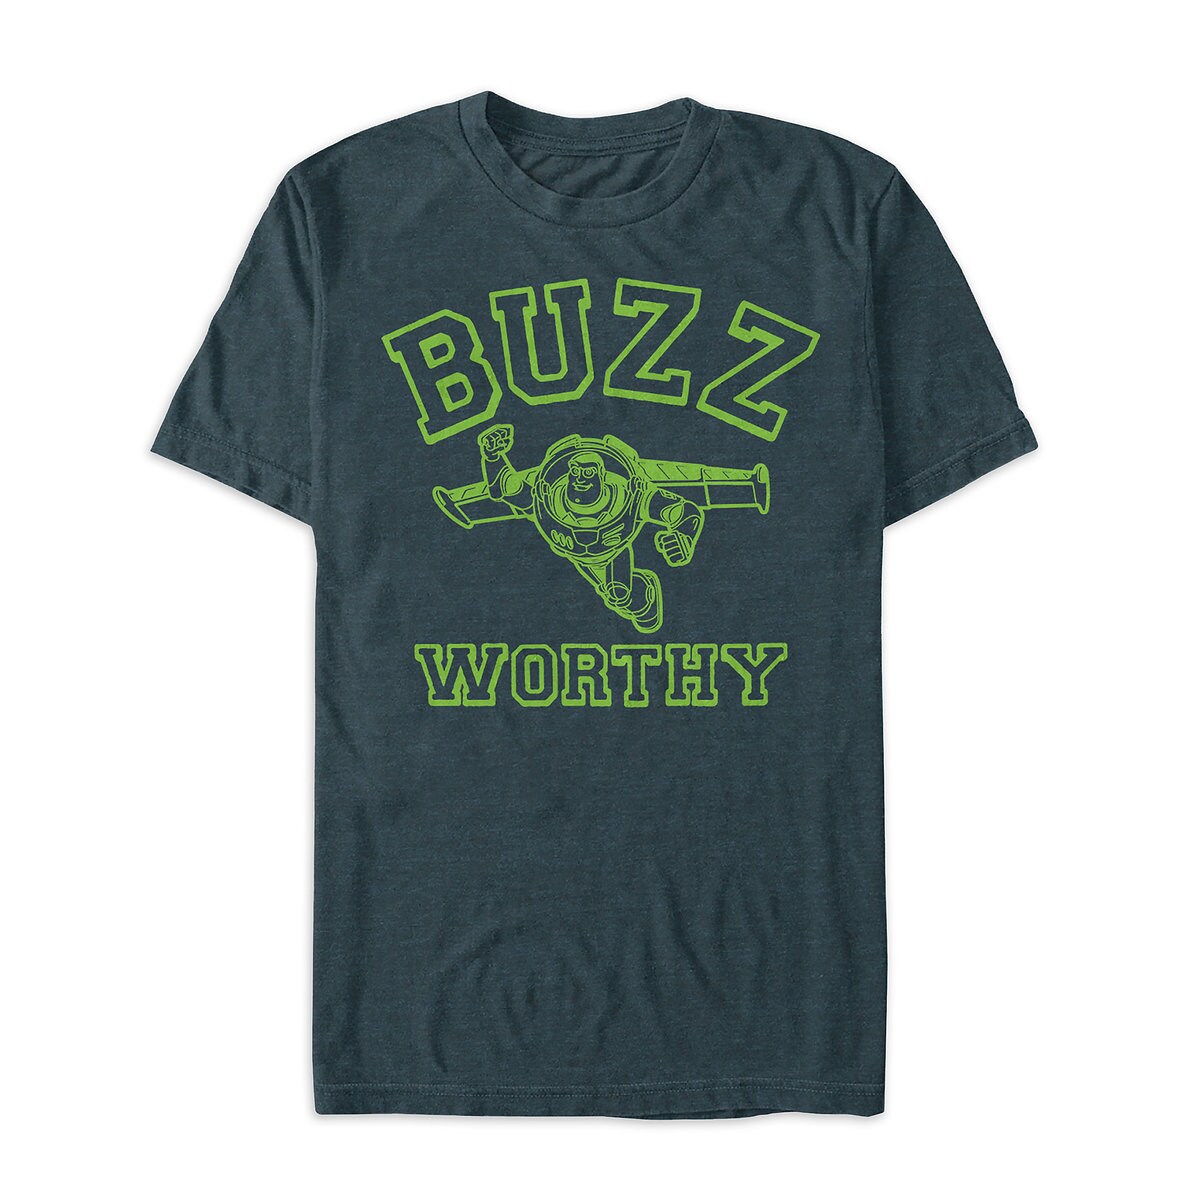 Product Image of Buzz Lightyear ''Buzz Worthy'' T-Shirt for Men # 1